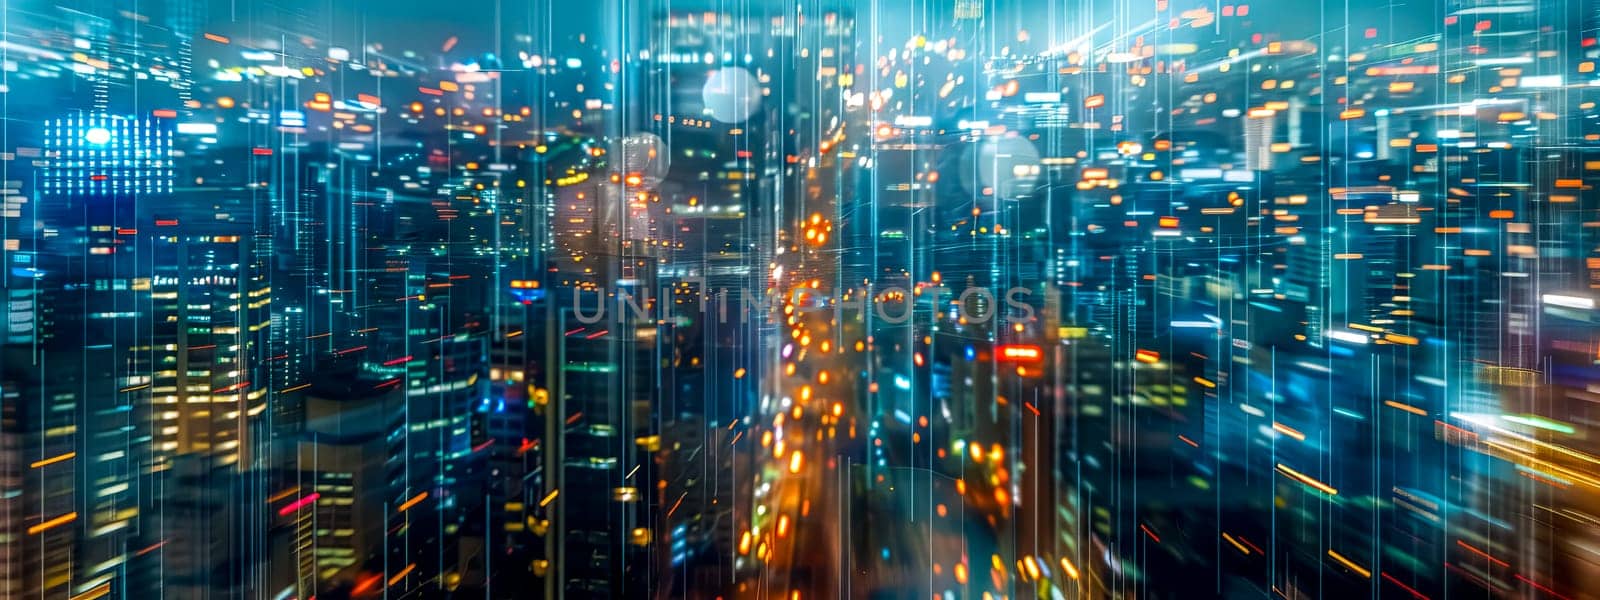 Long exposure shot of city lights creating a dynamic, abstract blur